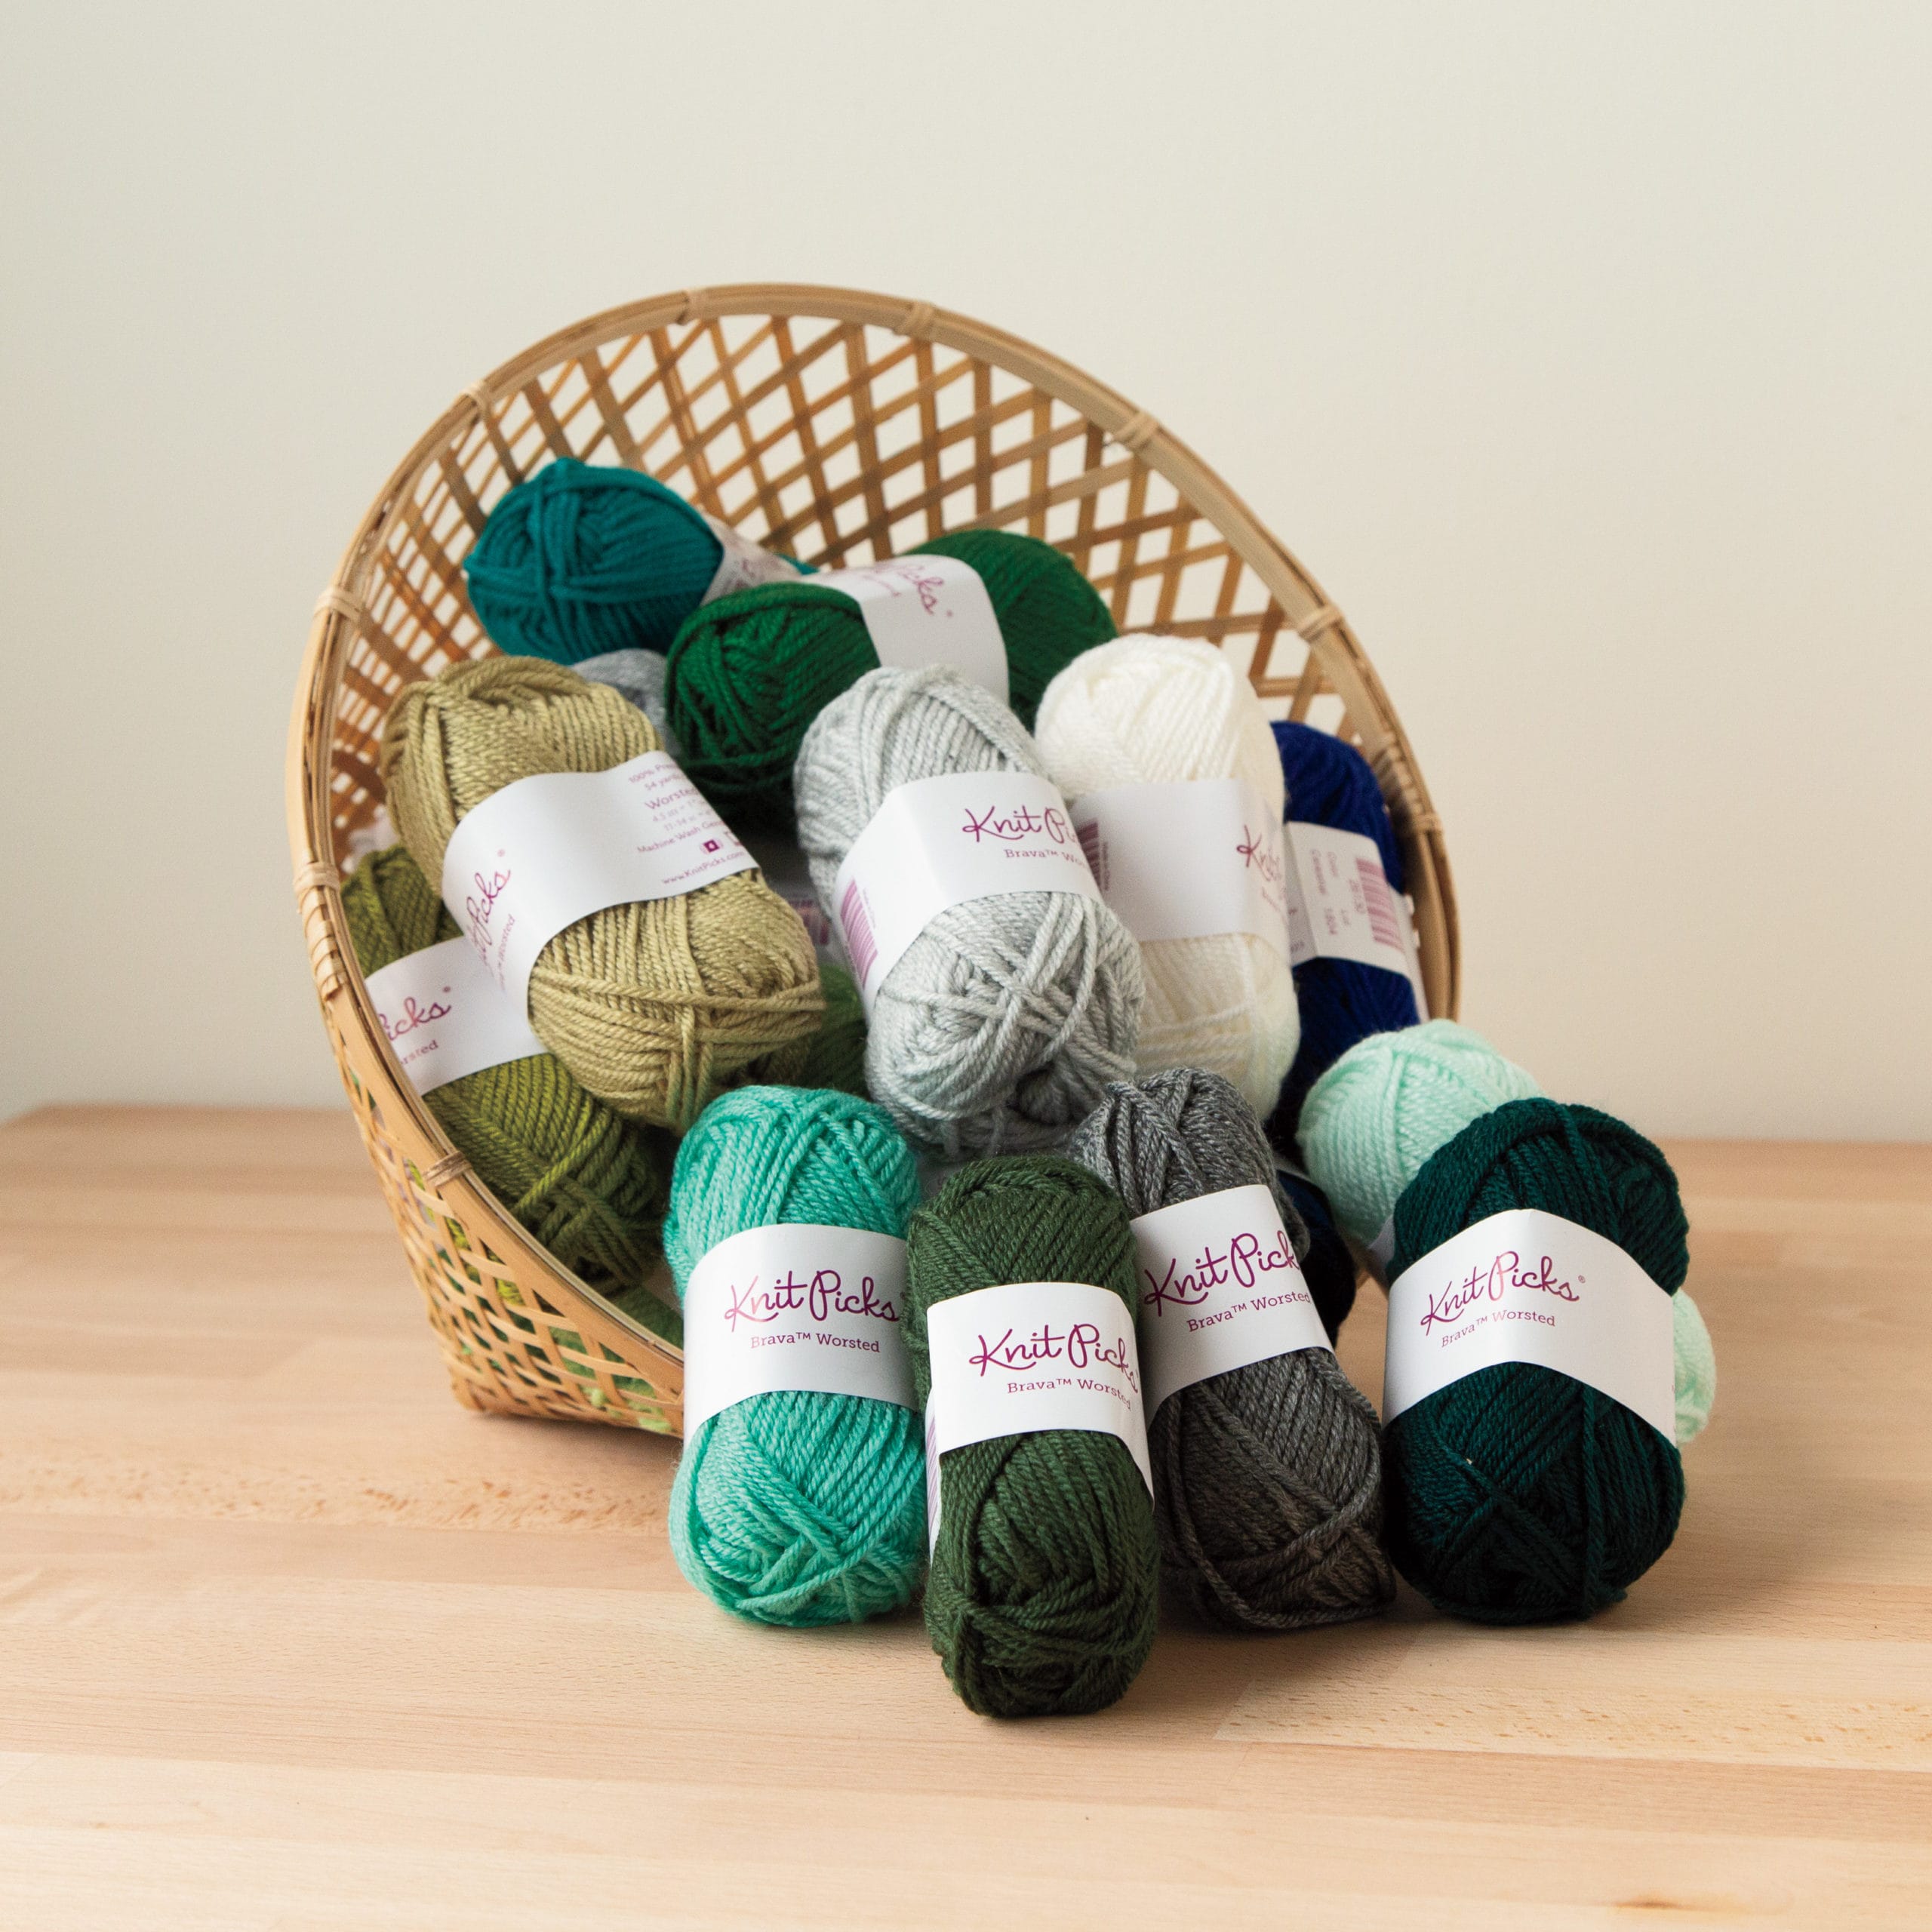 Brava Minis: Bite-sized Skeins for Bitty Projects - The Knit Picks